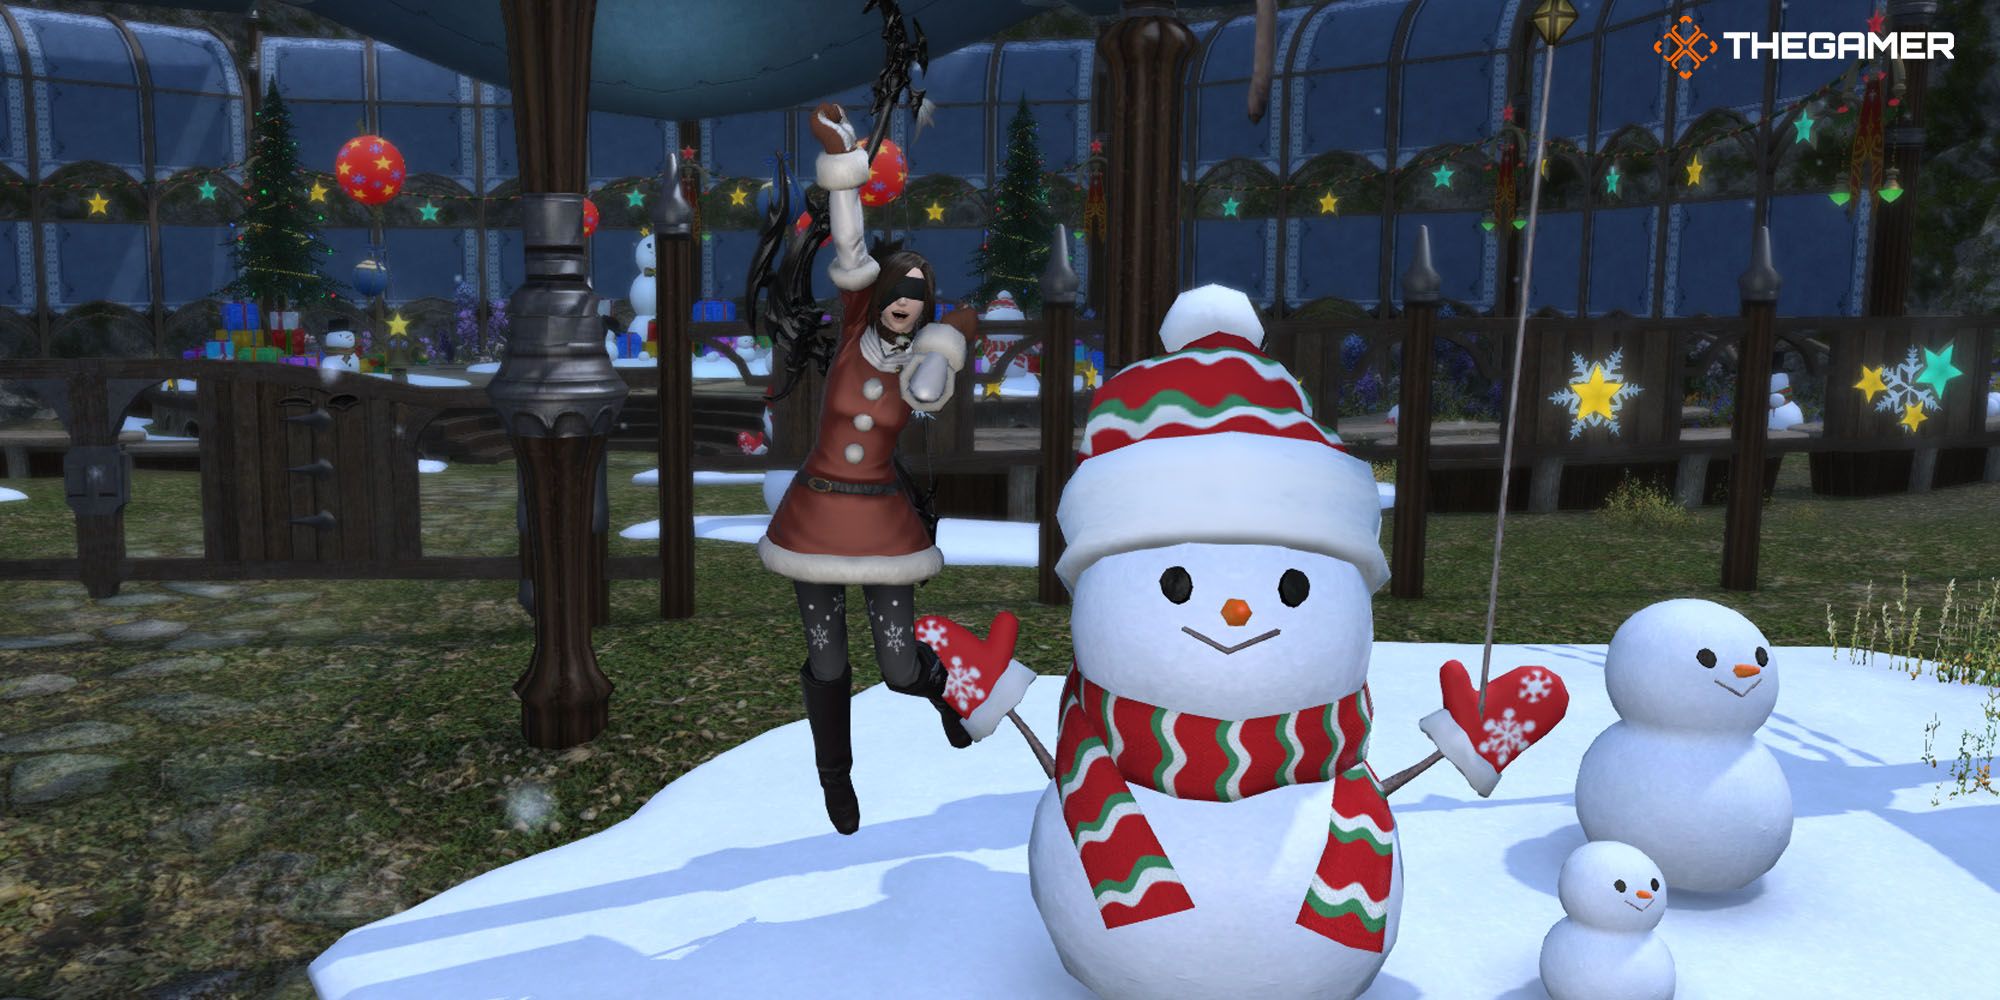 Final Fantasy XIV Captured The Magic Of Christmas When Nothing Else Could